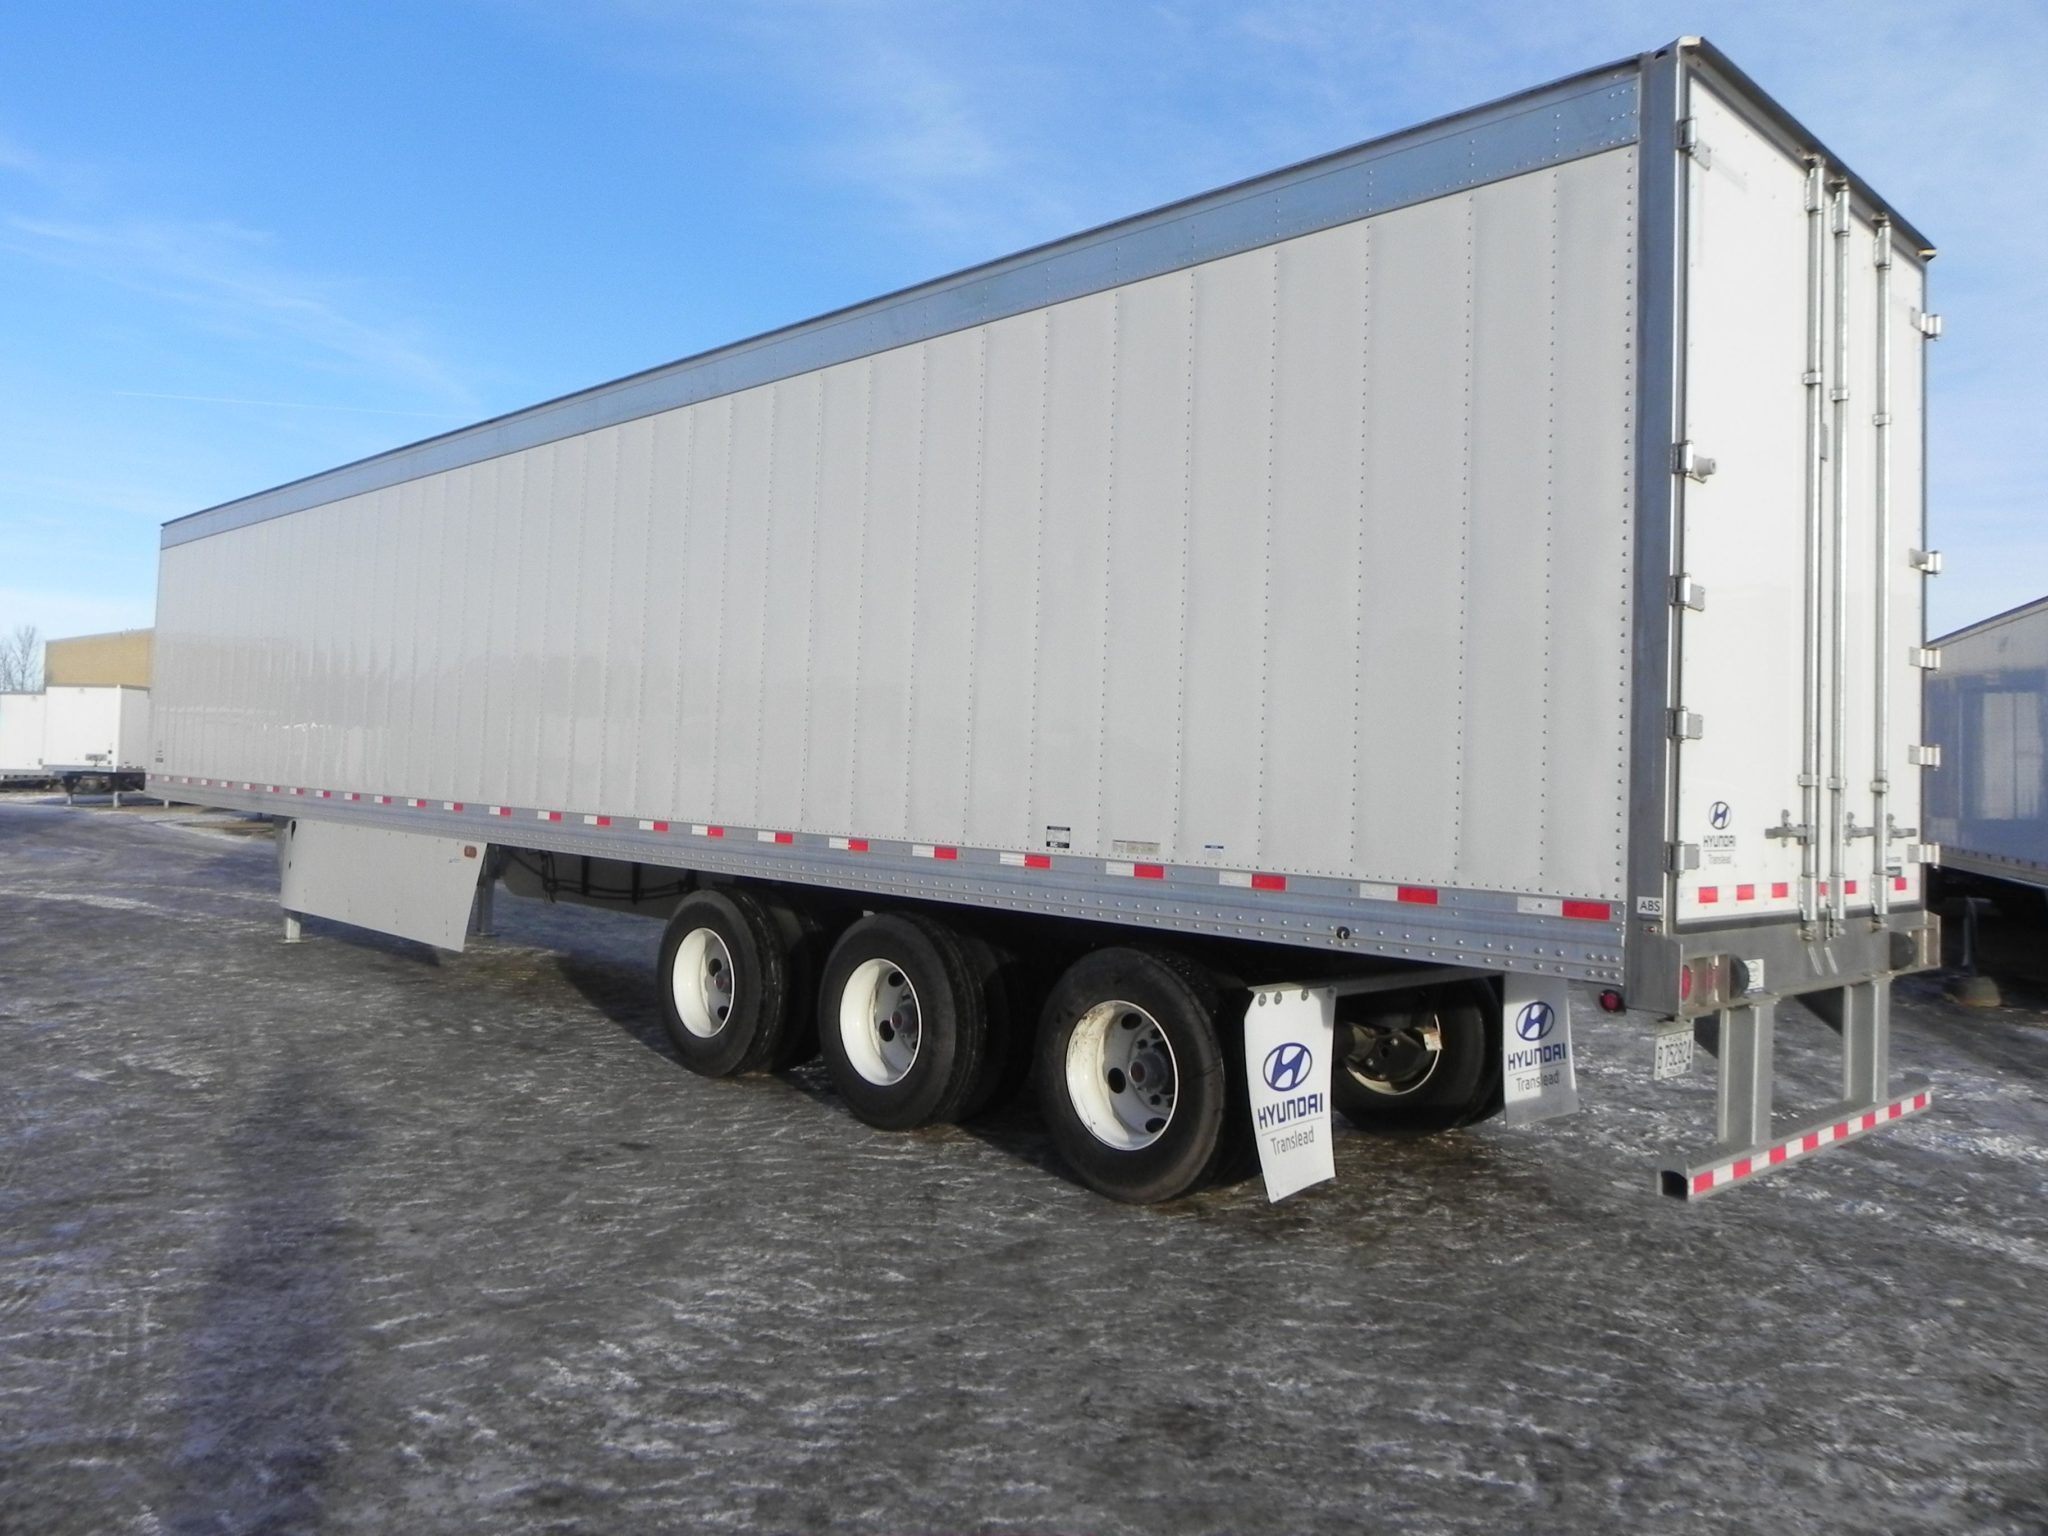 2020 Reefer Trailers Available At Kingpin Trailers